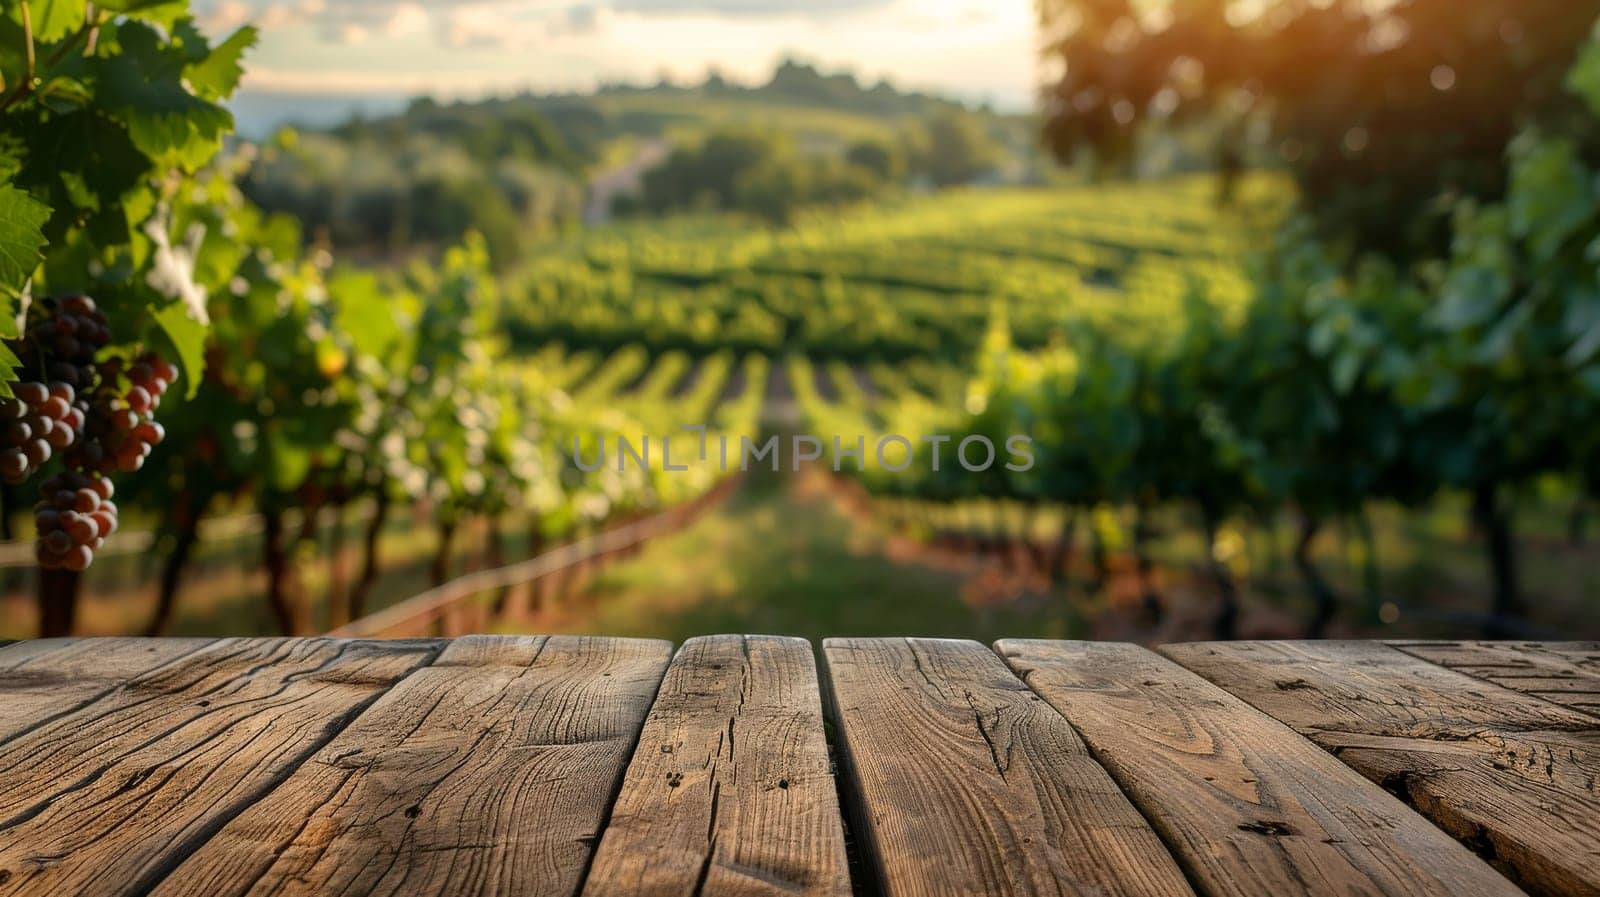 A vineyard with a wooden table in the foreground. The table is surrounded by vines and has a view of the vineyard. Scene is peaceful and serene, with the natural beauty of the vineyard